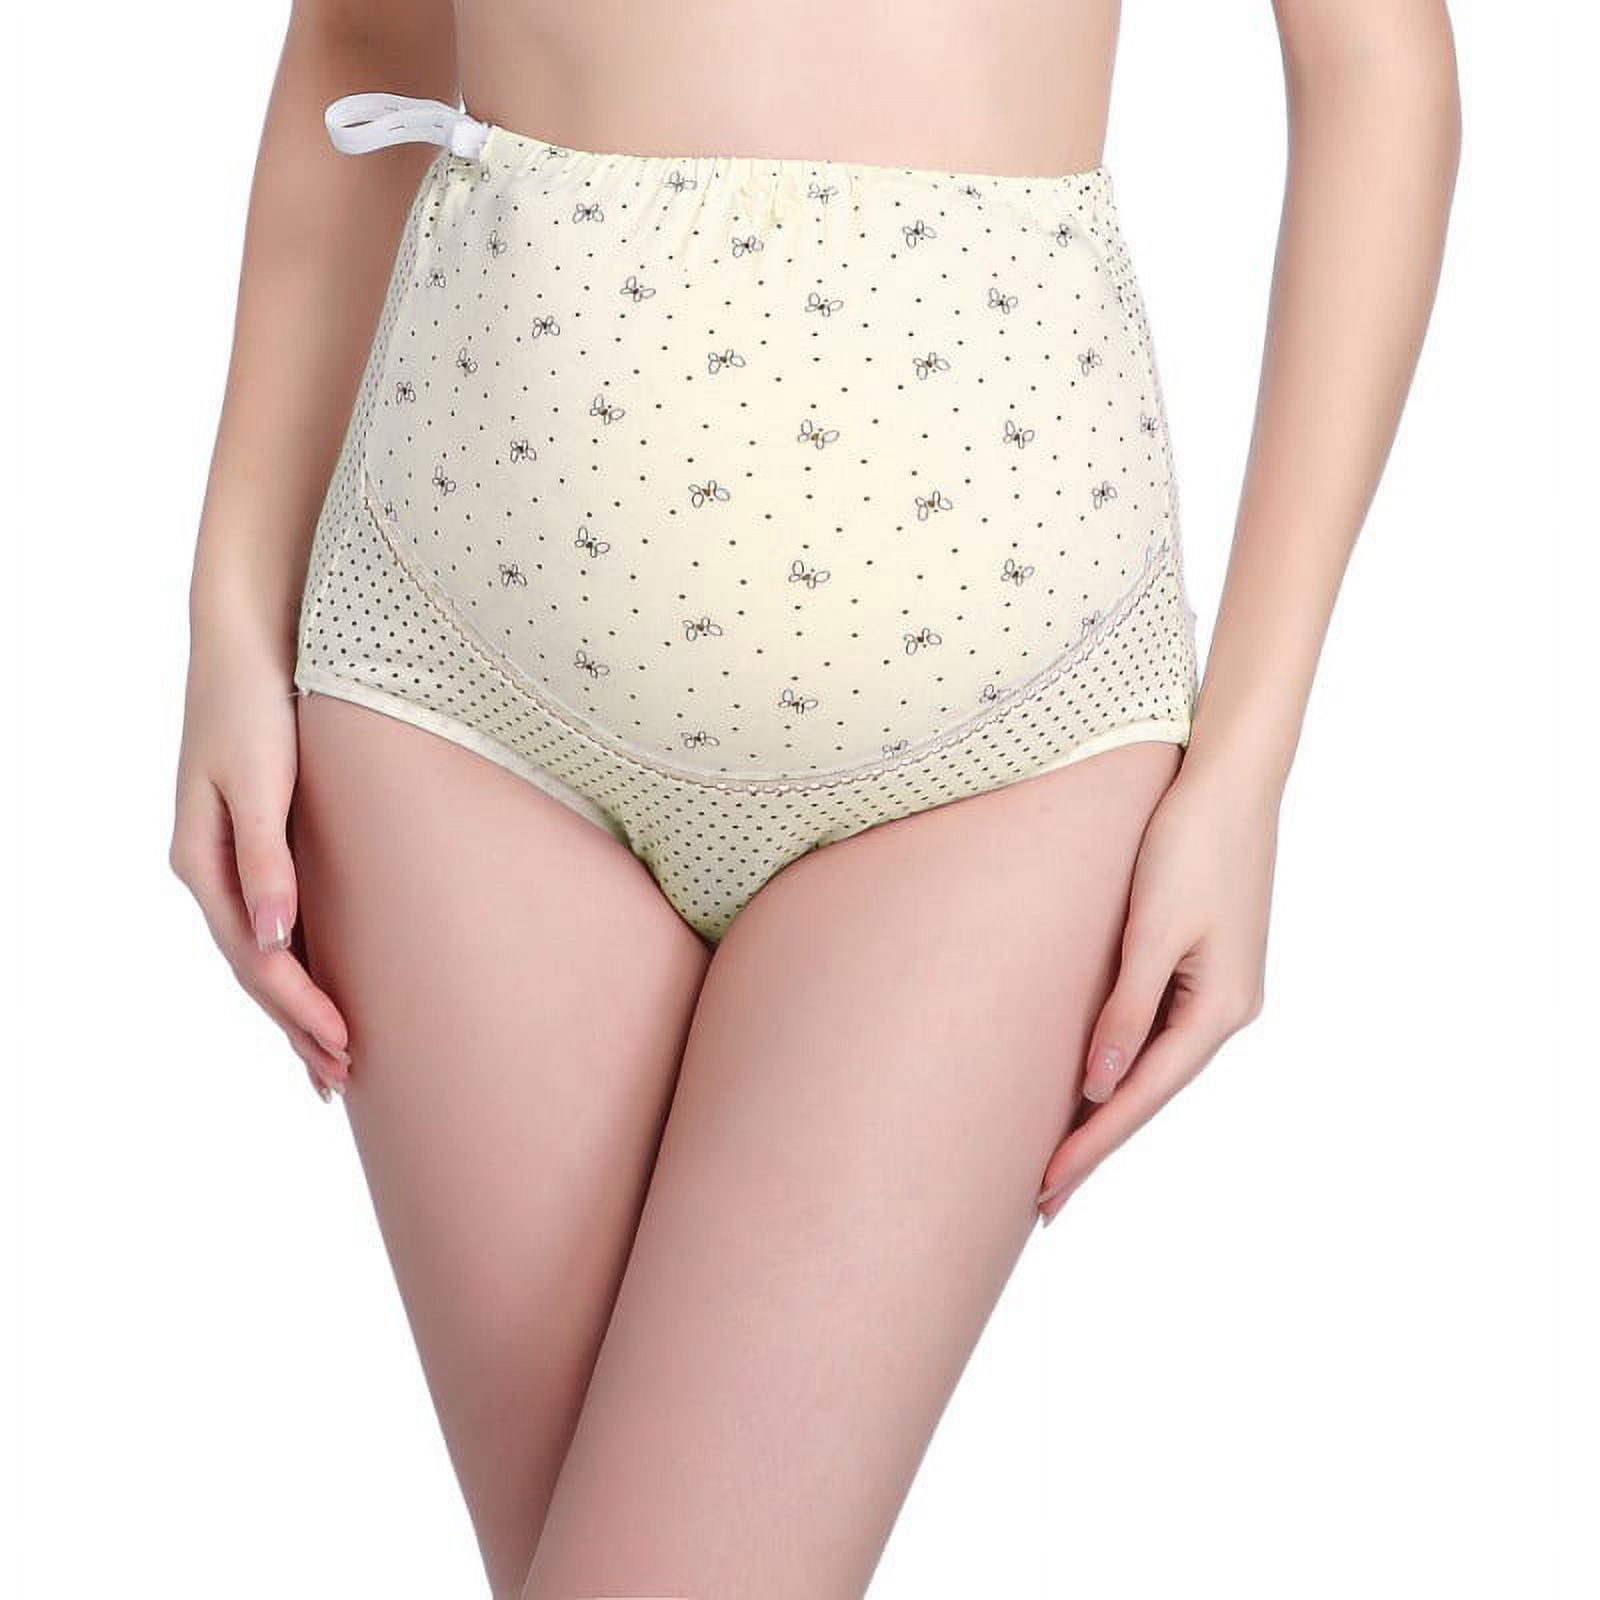 Manfiter Womens High Waist Cotton Panties C Section Recovery